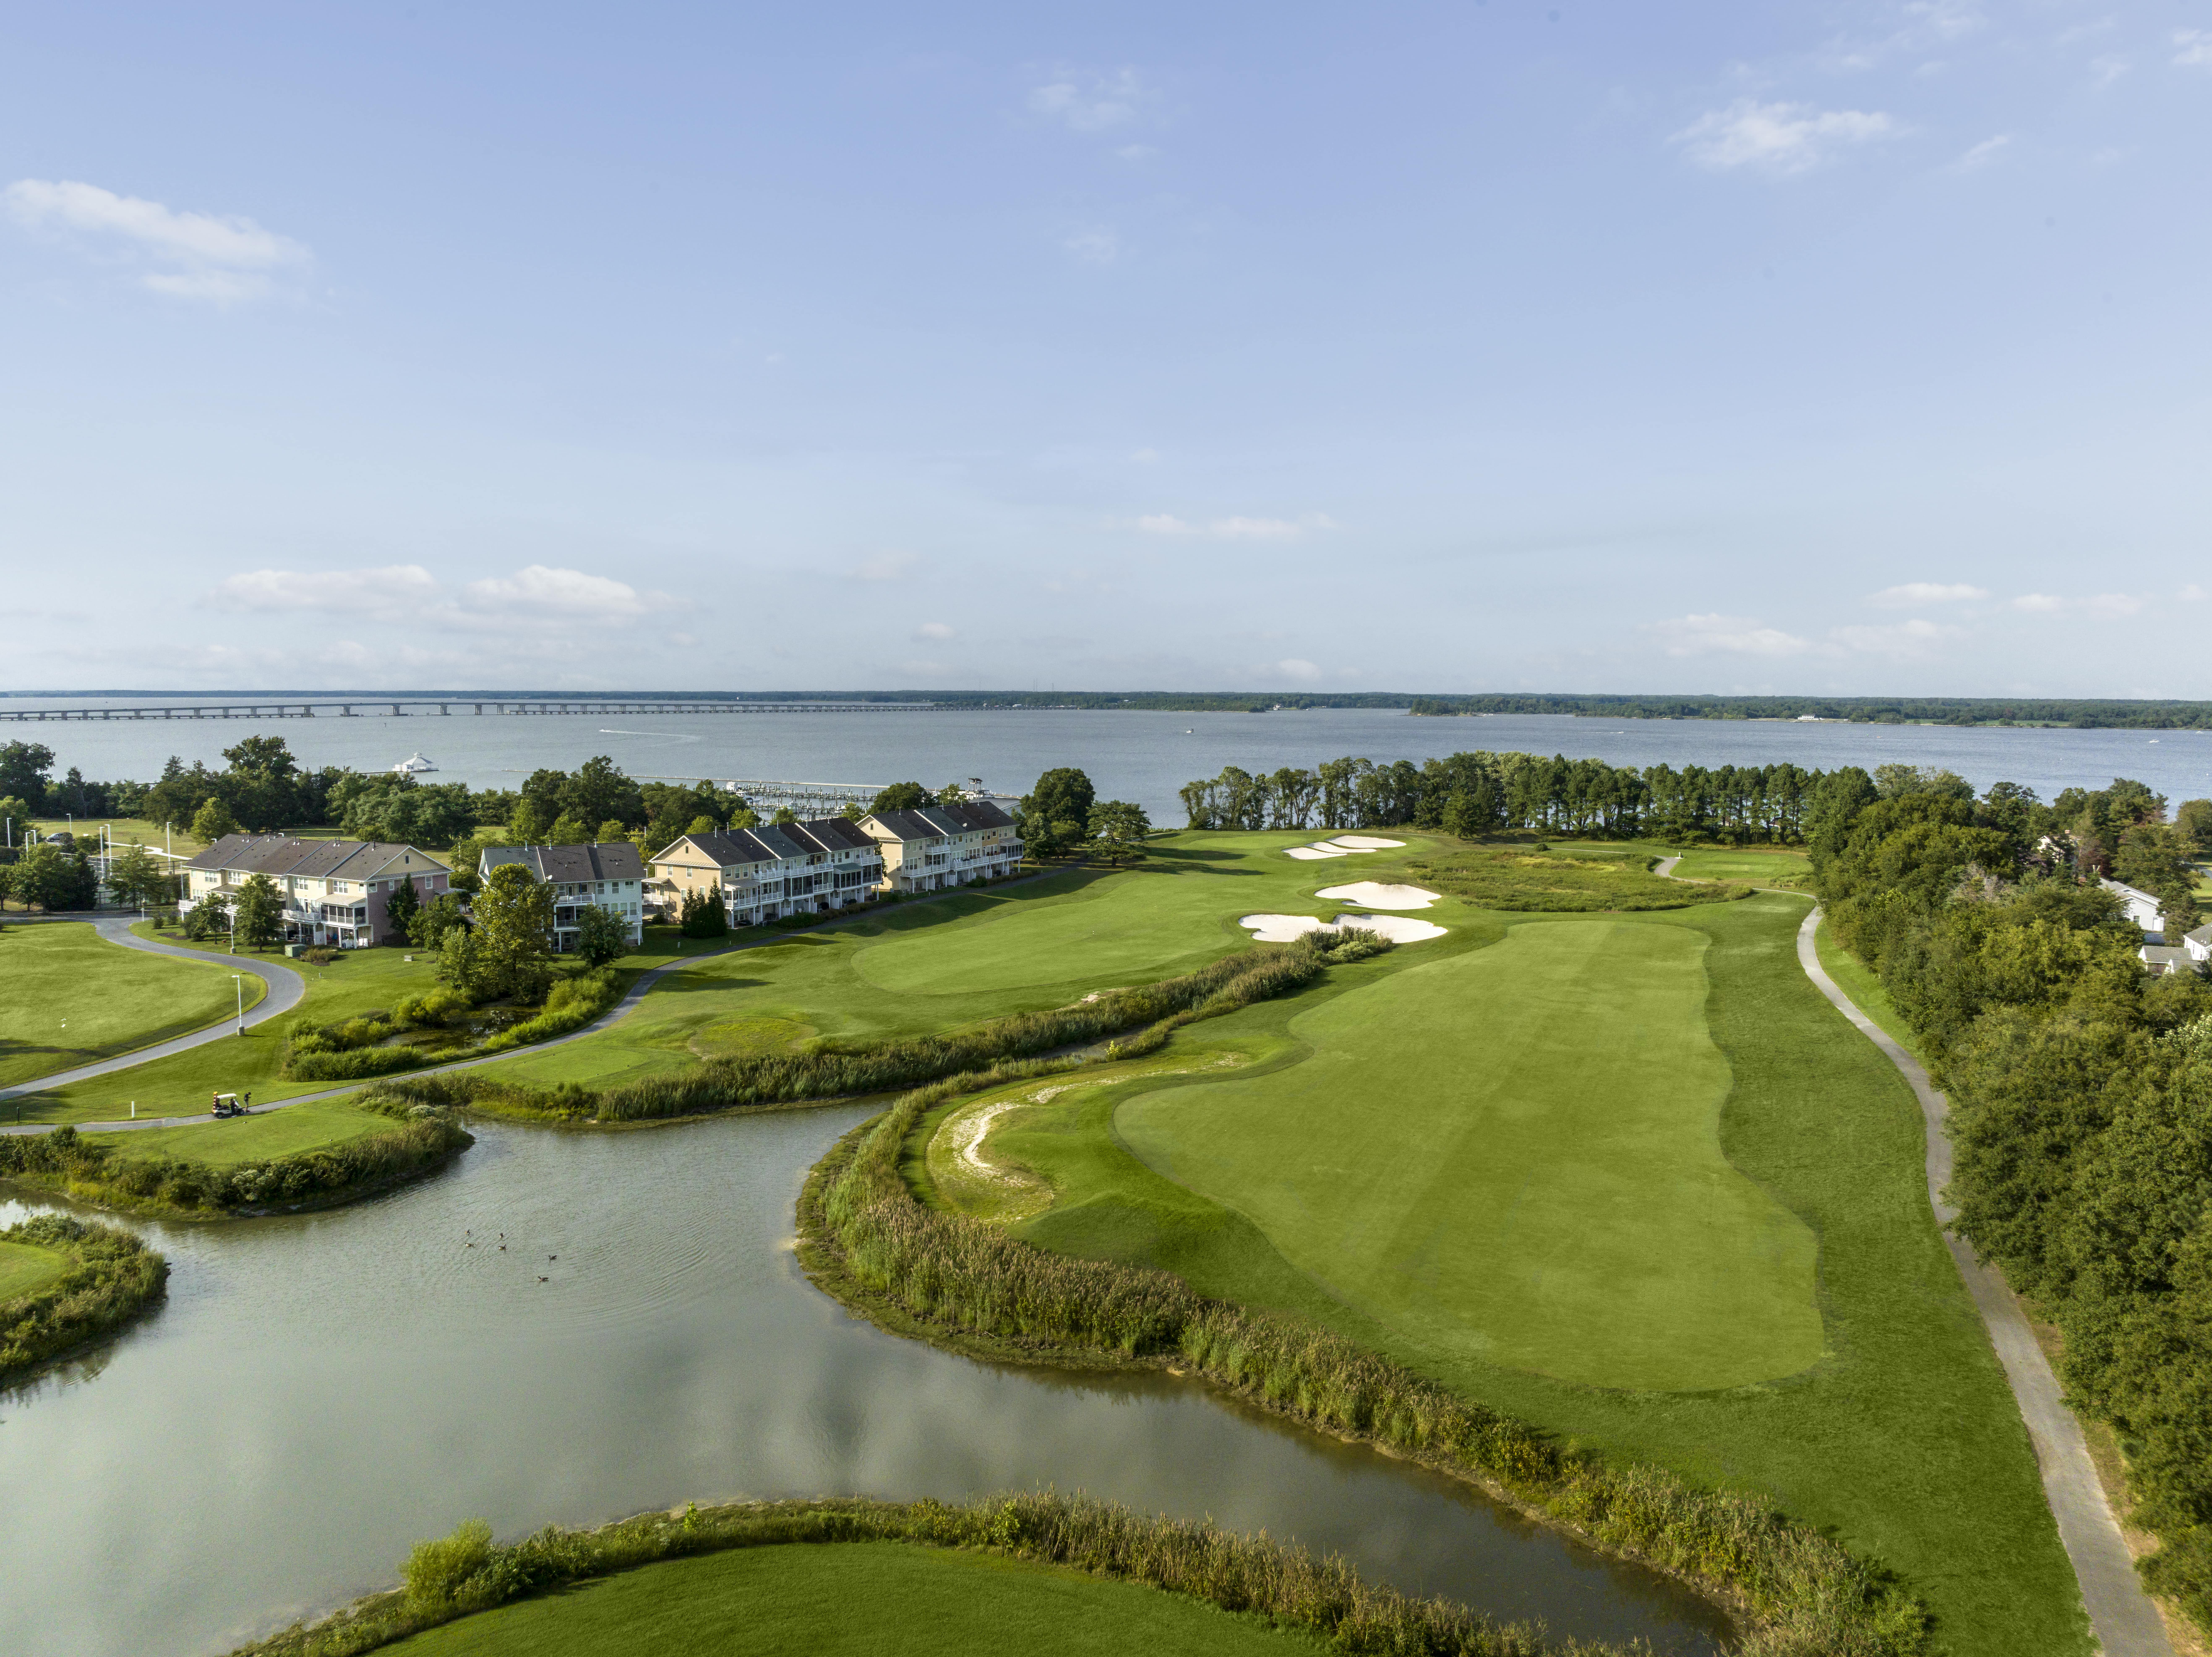 18 Holes of Eastern Shore Perfection